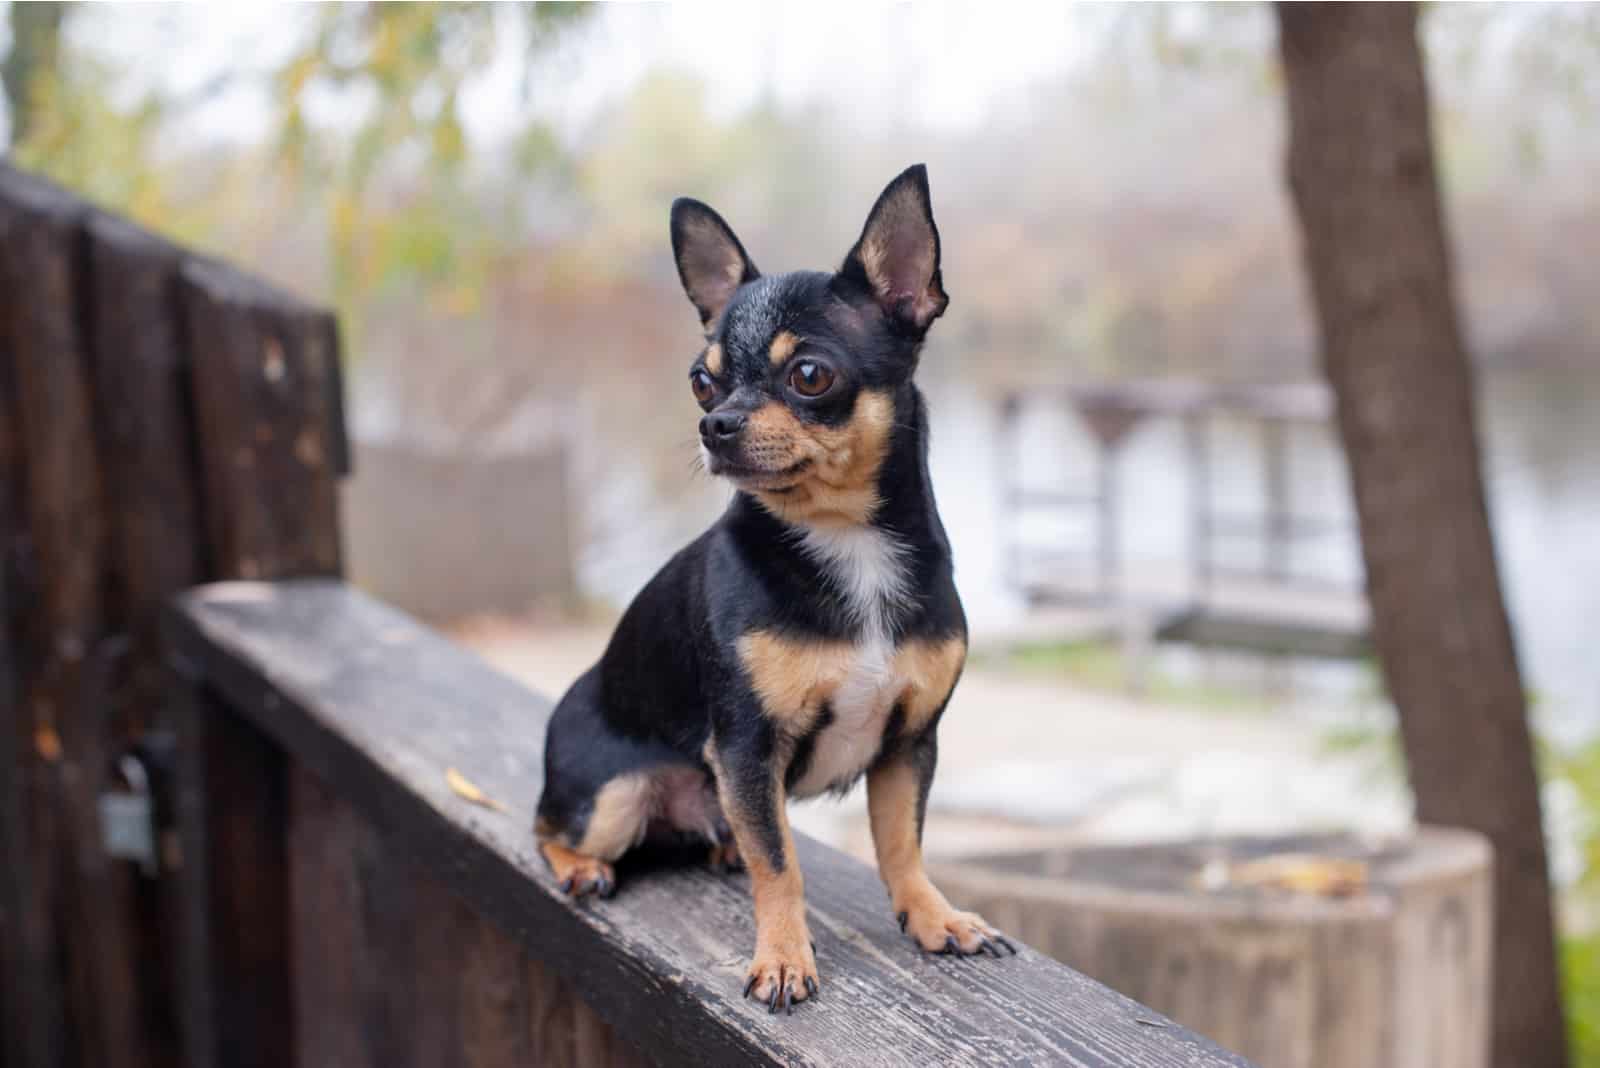 Chihuahua dog standing outdoors